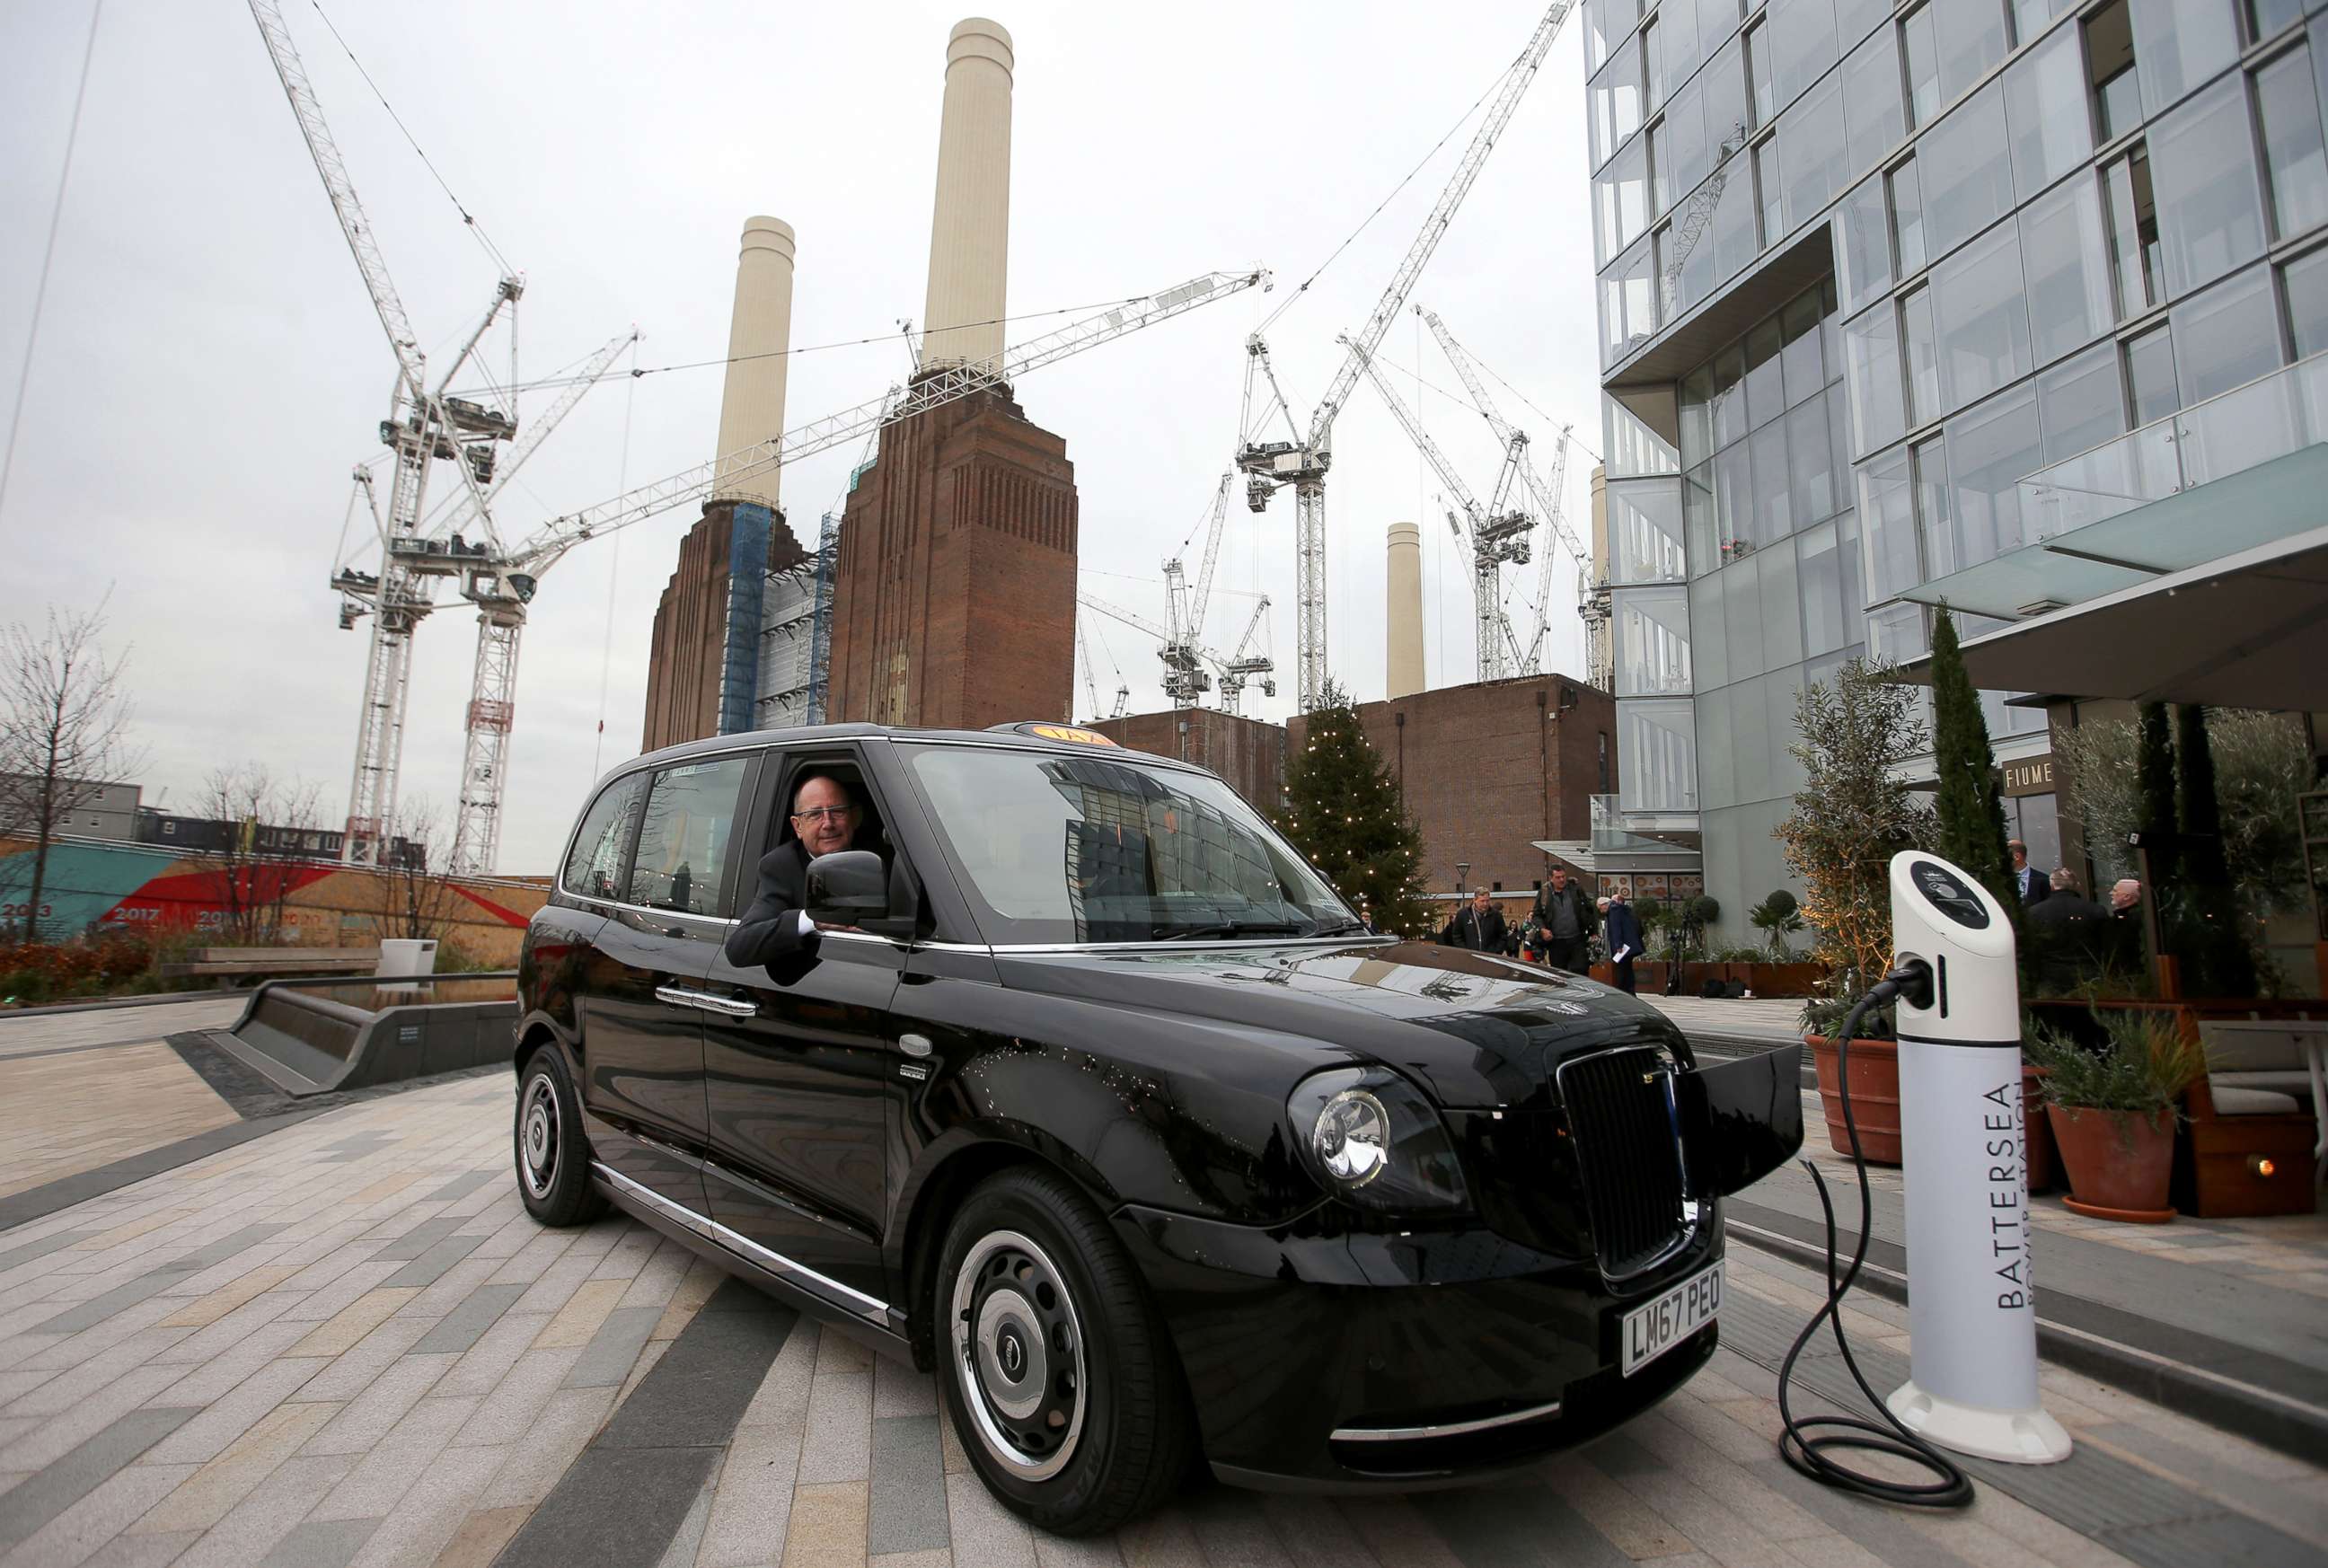 PHOTO: CEO of London EV Company, Chris Gubbey poses inside the new electric TX eCity taxi connected to a sample electric vehicle charger at the Battersea power station in London, Dec. 5, 2017.